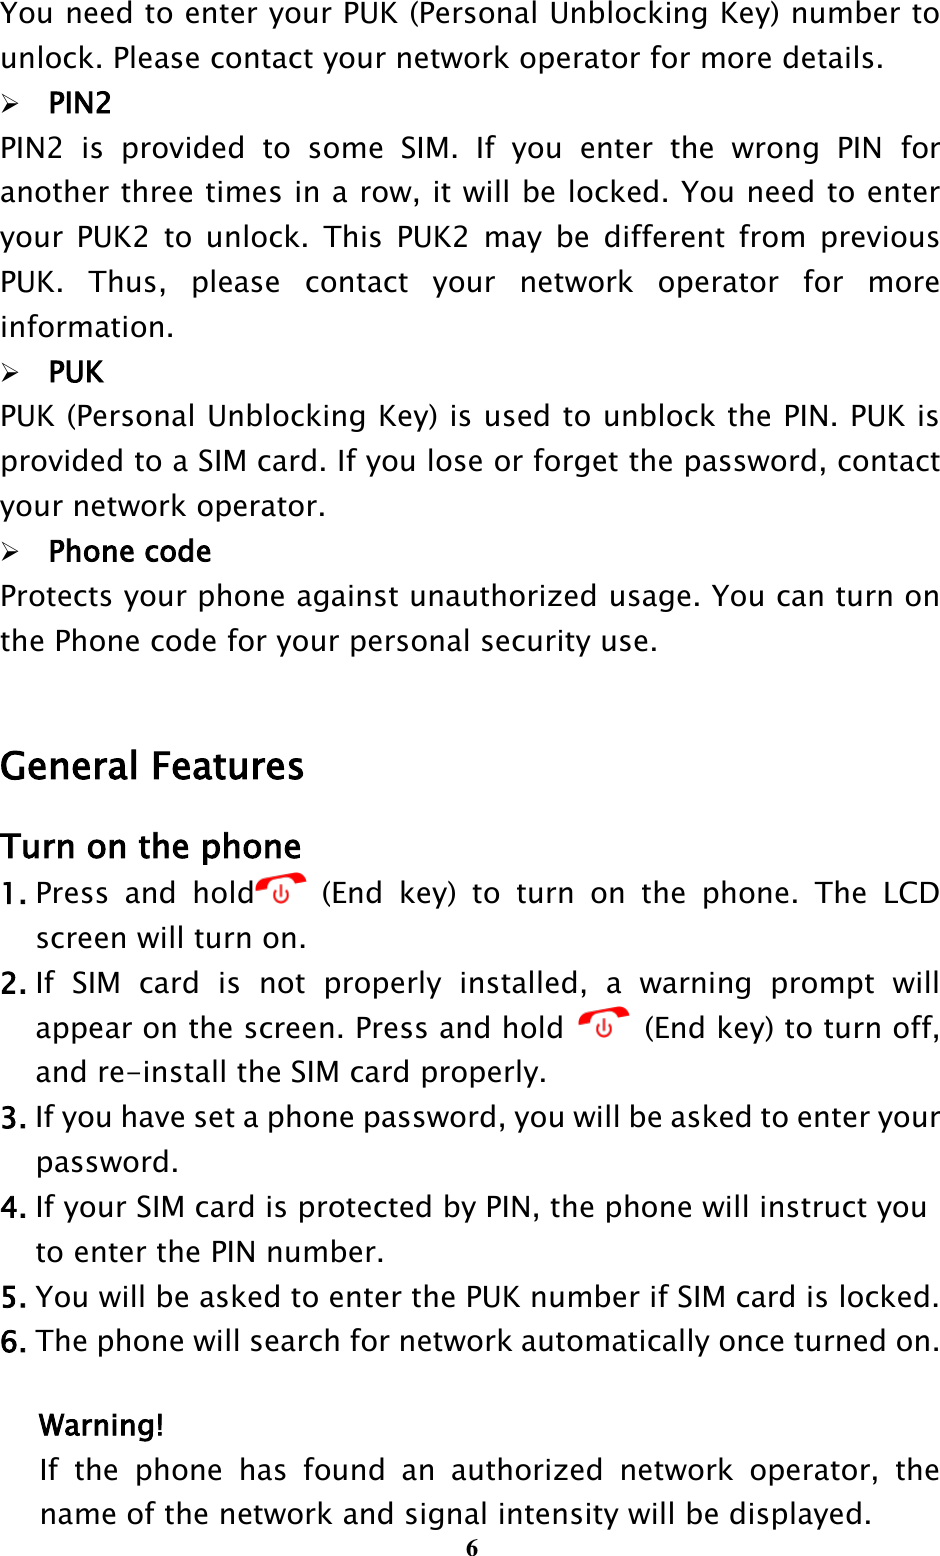  6 You need to enter your PUK (Personal Unblocking Key) number to unlock. Please contact your network operator for more details. PIN2 PIN2  is  provided  to  some  SIM.  If  you  enter  the  wrong  PIN  for another three times in a row, it will be locked. You need to enter your  PUK2  to  unlock.  This  PUK2 may  be  different from  previous PUK.  Thus,  please  contact  your  network  operator  for  more information. PUK PUK (Personal Unblocking Key) is used to unblock the PIN. PUK is provided to a SIM card. If you lose or forget the password, contact your network operator. Phone code Protects your phone against unauthorized usage. You can turn on the Phone code for your personal security use.  General Features Turn on the phone 1. Press  and  hold   (End  key)  to  turn  on  the  phone.  The  LCD screen will turn on. 2. If  SIM  card  is  not  properly  installed,  a  warning  prompt  will appear on the screen. Press and hold    (End key) to turn off, and re-install the SIM card properly. 3. If you have set a phone password, you will be asked to enter your     password. 4. If your SIM card is protected by PIN, the phone will instruct you     to enter the PIN number. 5. You will be asked to enter the PUK number if SIM card is locked. 6. The phone will search for network automatically once turned on.  Warning! If  the  phone  has  found  an  authorized  network  operator,  the name of the network and signal intensity will be displayed. 